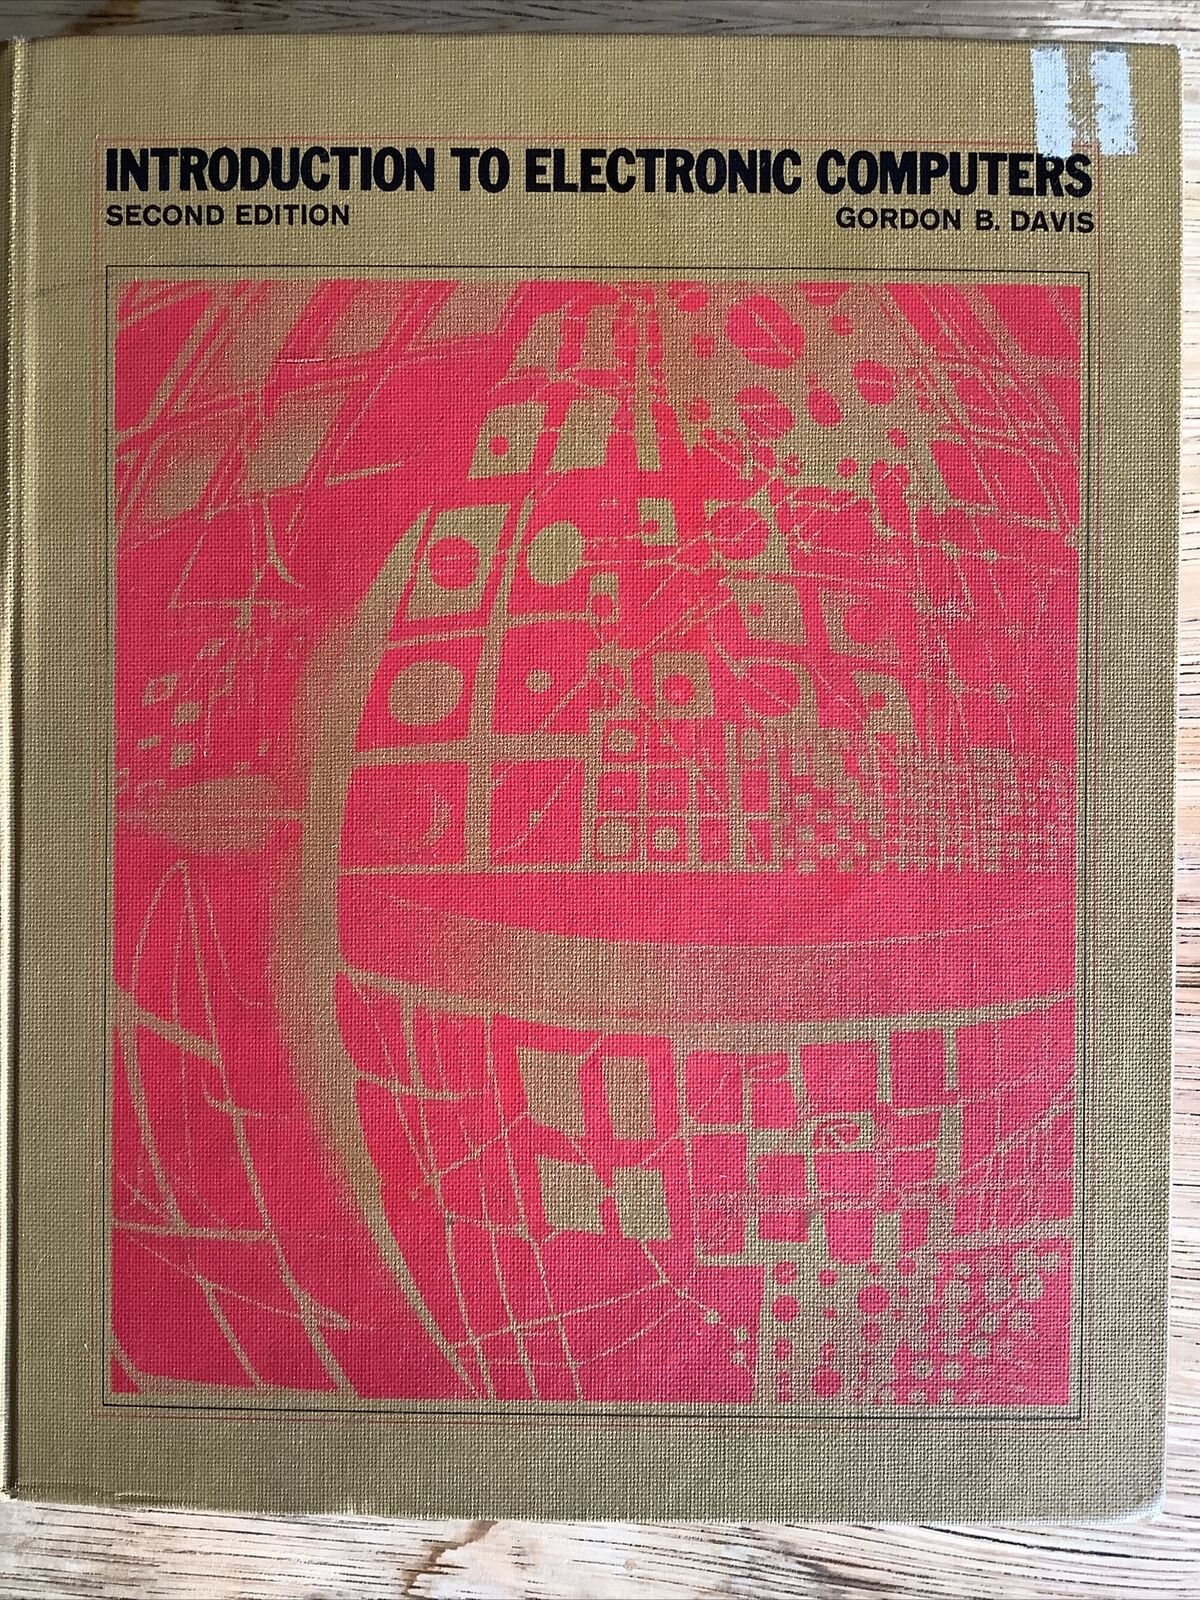 1971 “Introduction To Electronic Computers” Vintage Home Office Decor  